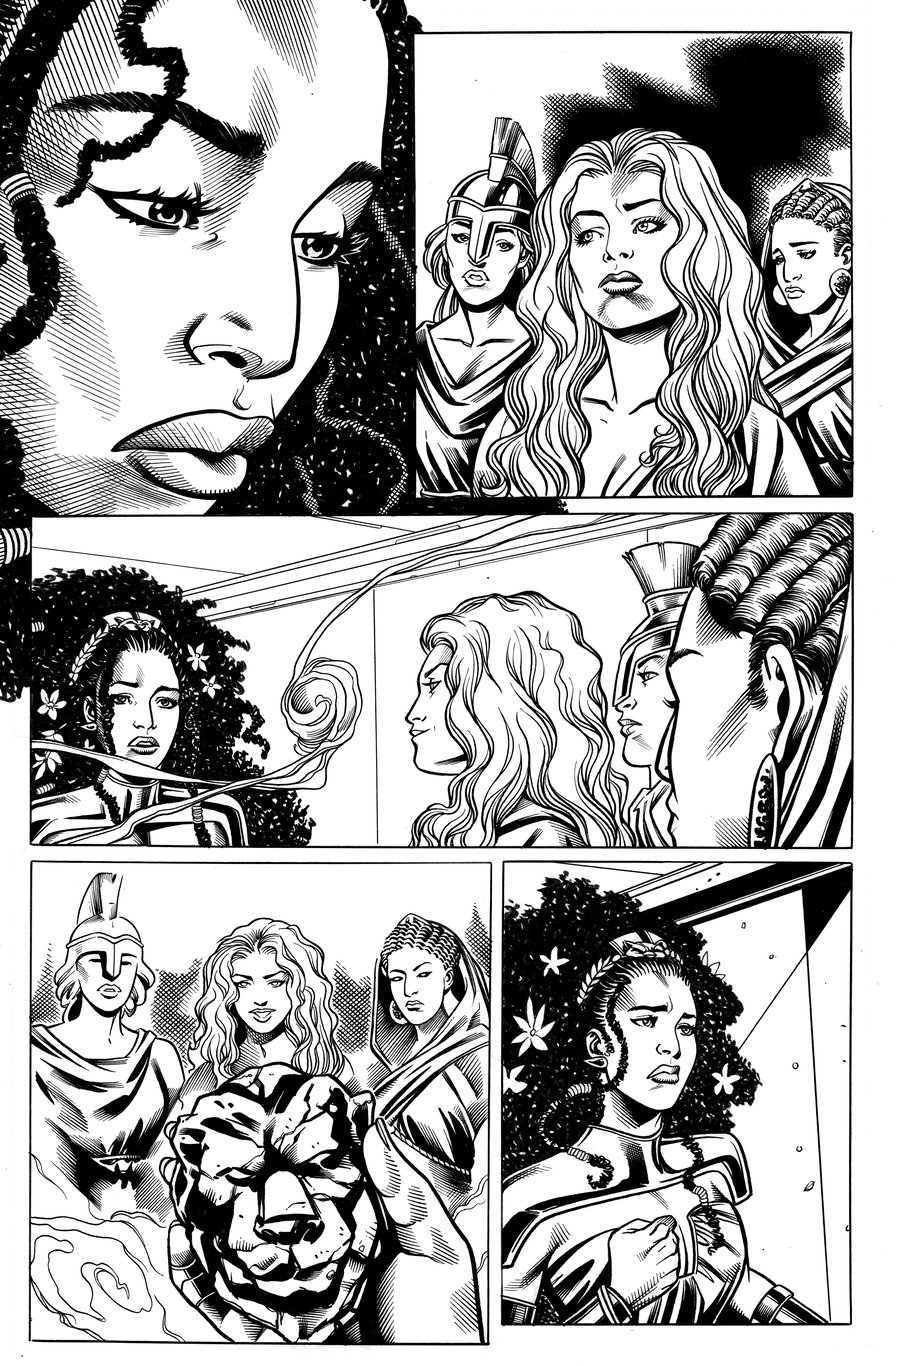 Image of Nubia and the Amazons #2 PG 3